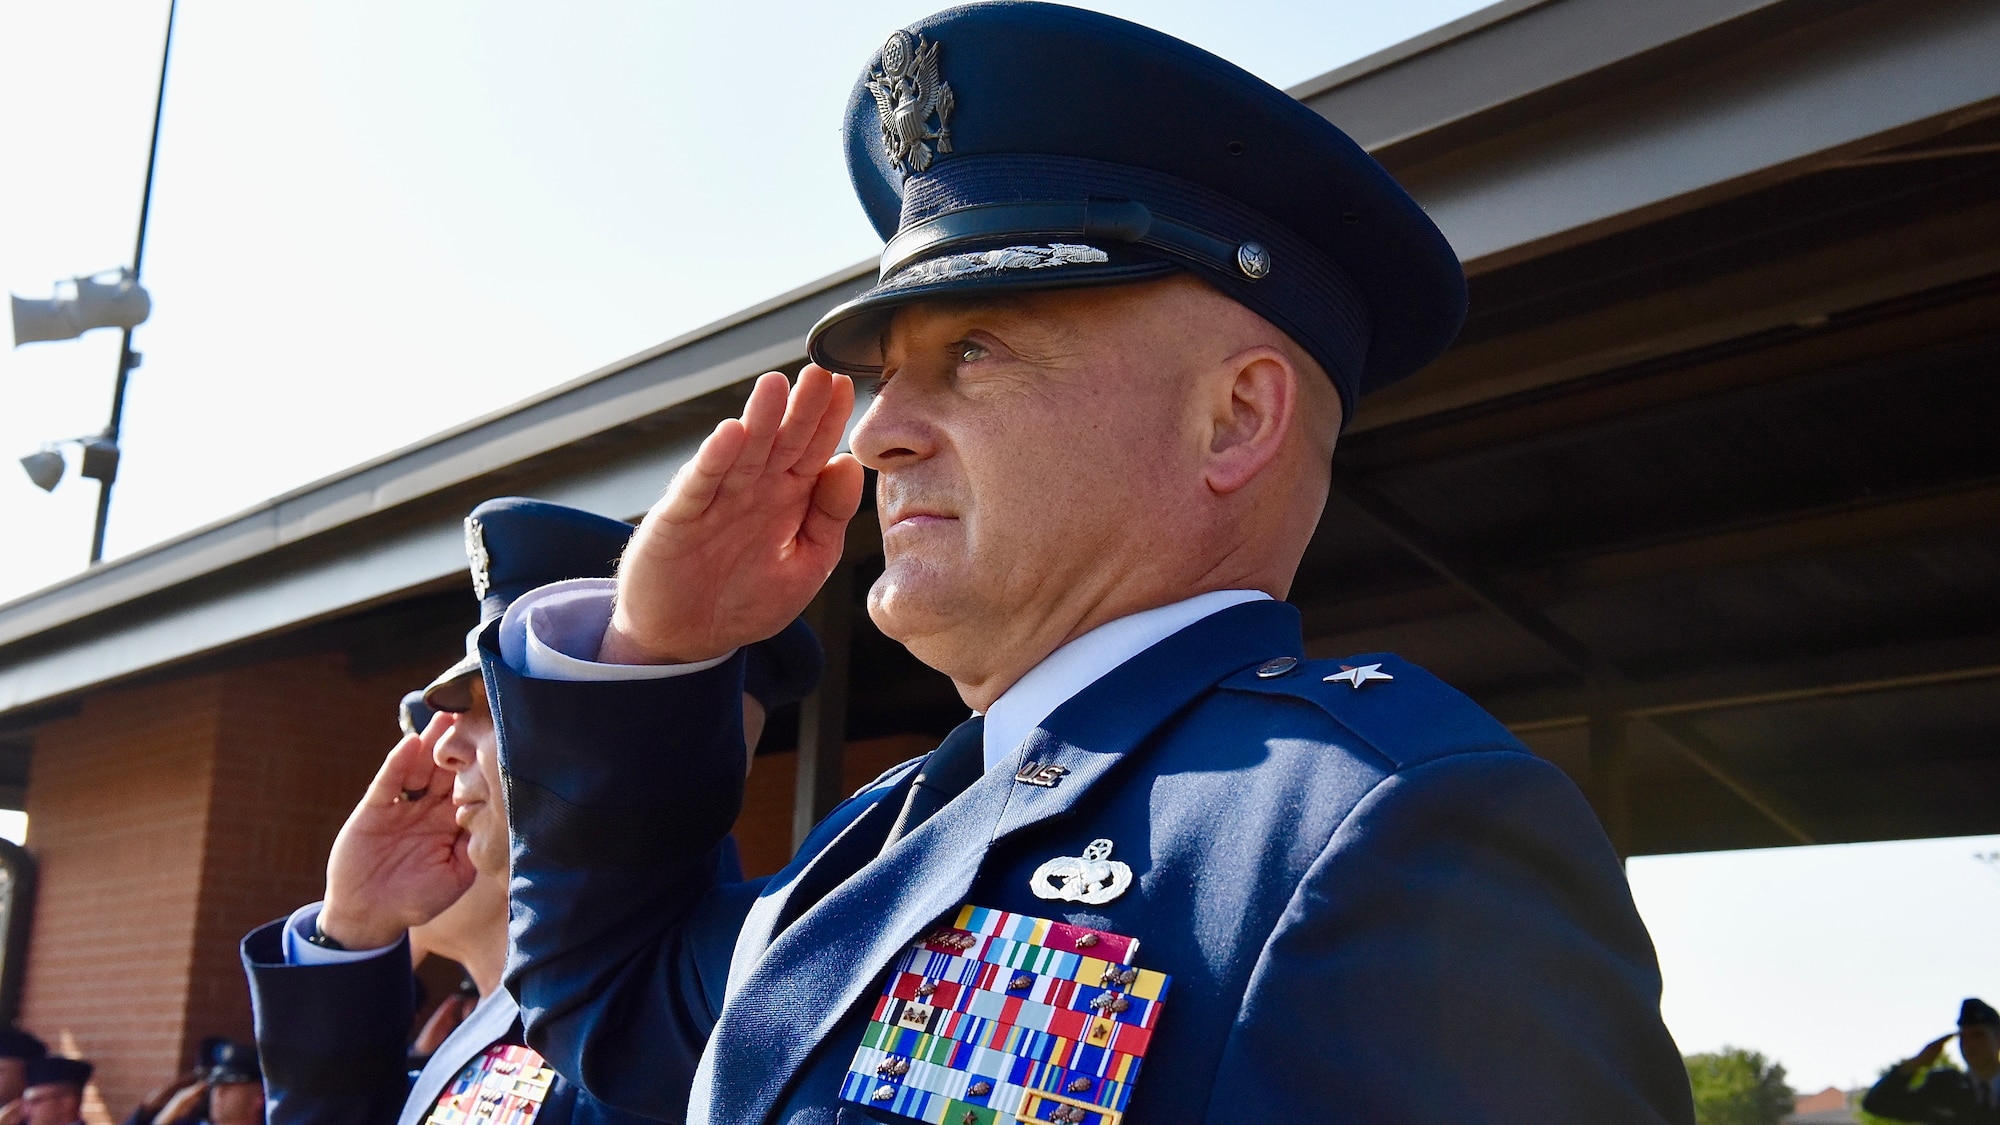 Brig. Gen. George T.M. Dietrich III, 82nd Training Wing incoming commander, gives a salute at the 82nd TRW Change of Command Ceremony at Sheppard Air Force Base, Texas, June 27, 2023.